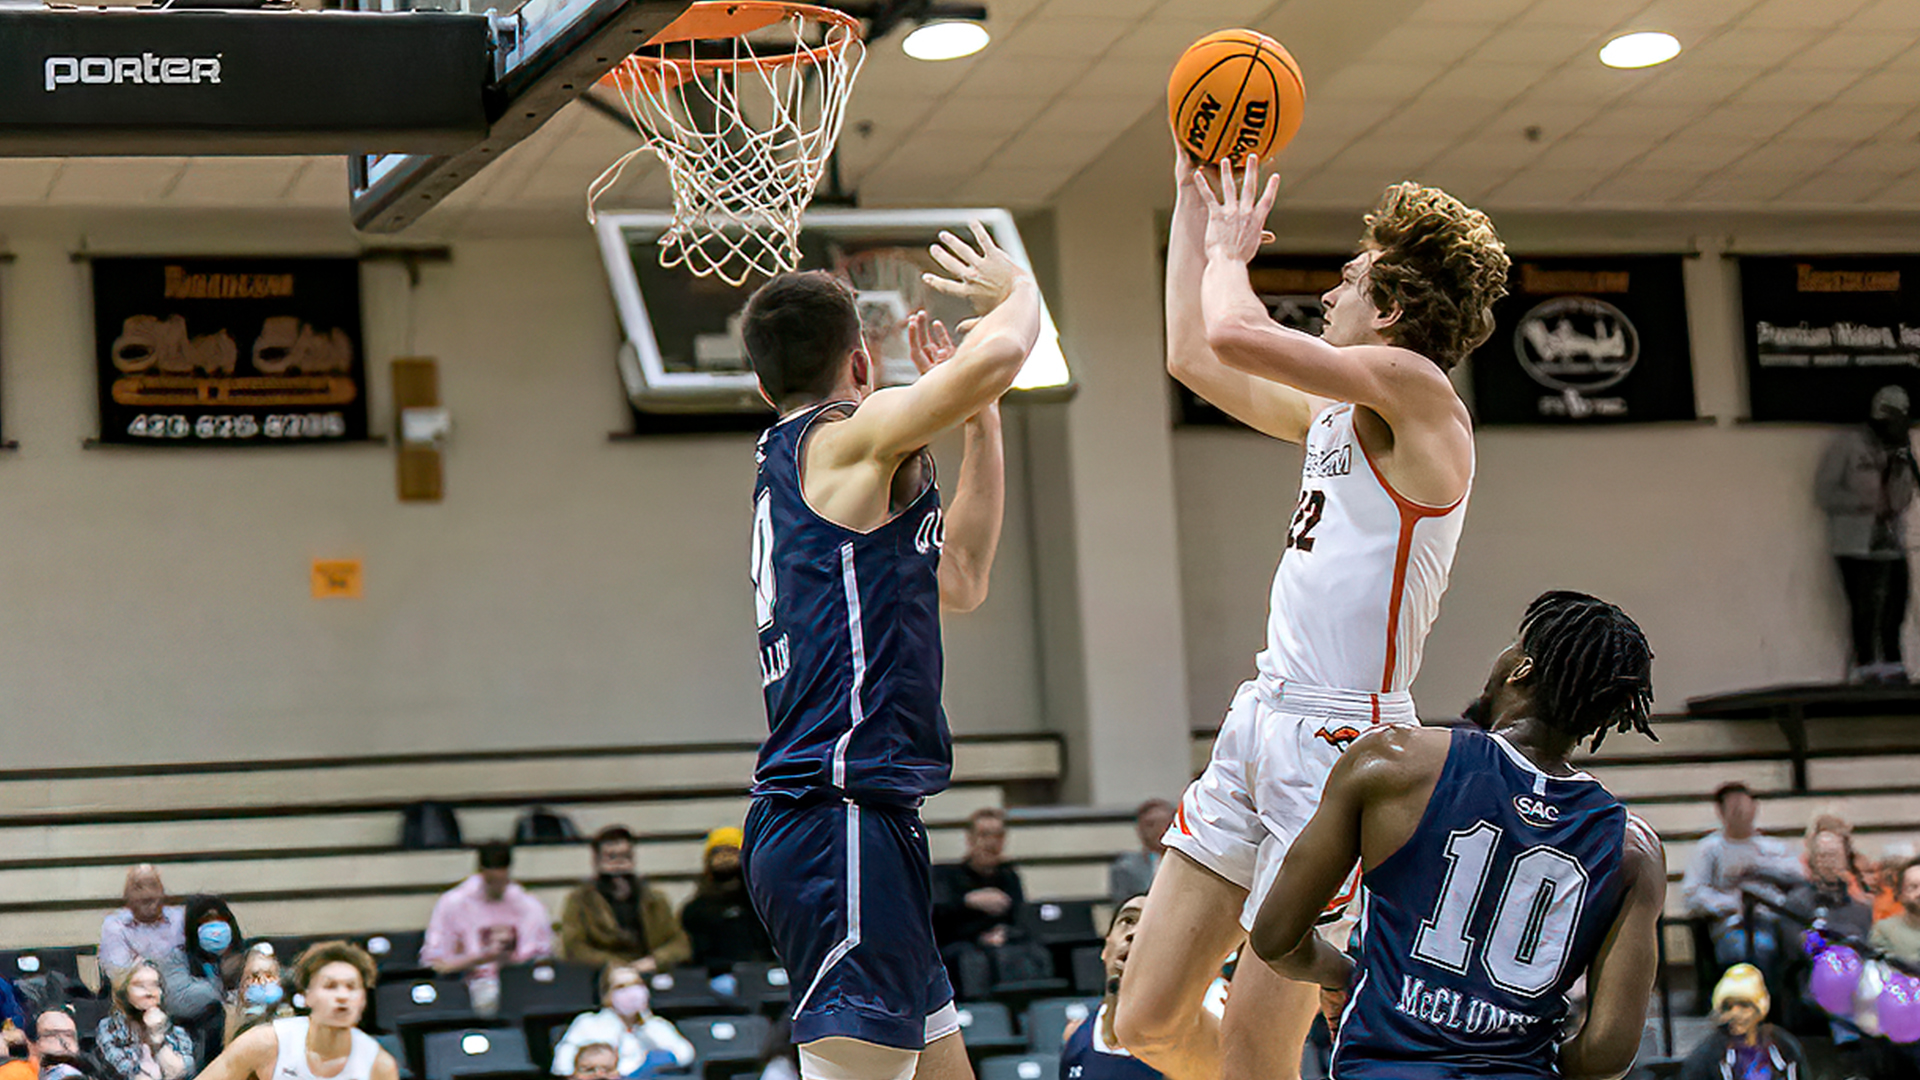 Jacob Hobbs recorded his first collegiate double-double with 12 points and a career-high 12 rebounds against Queens (photo by Chuck Williams)